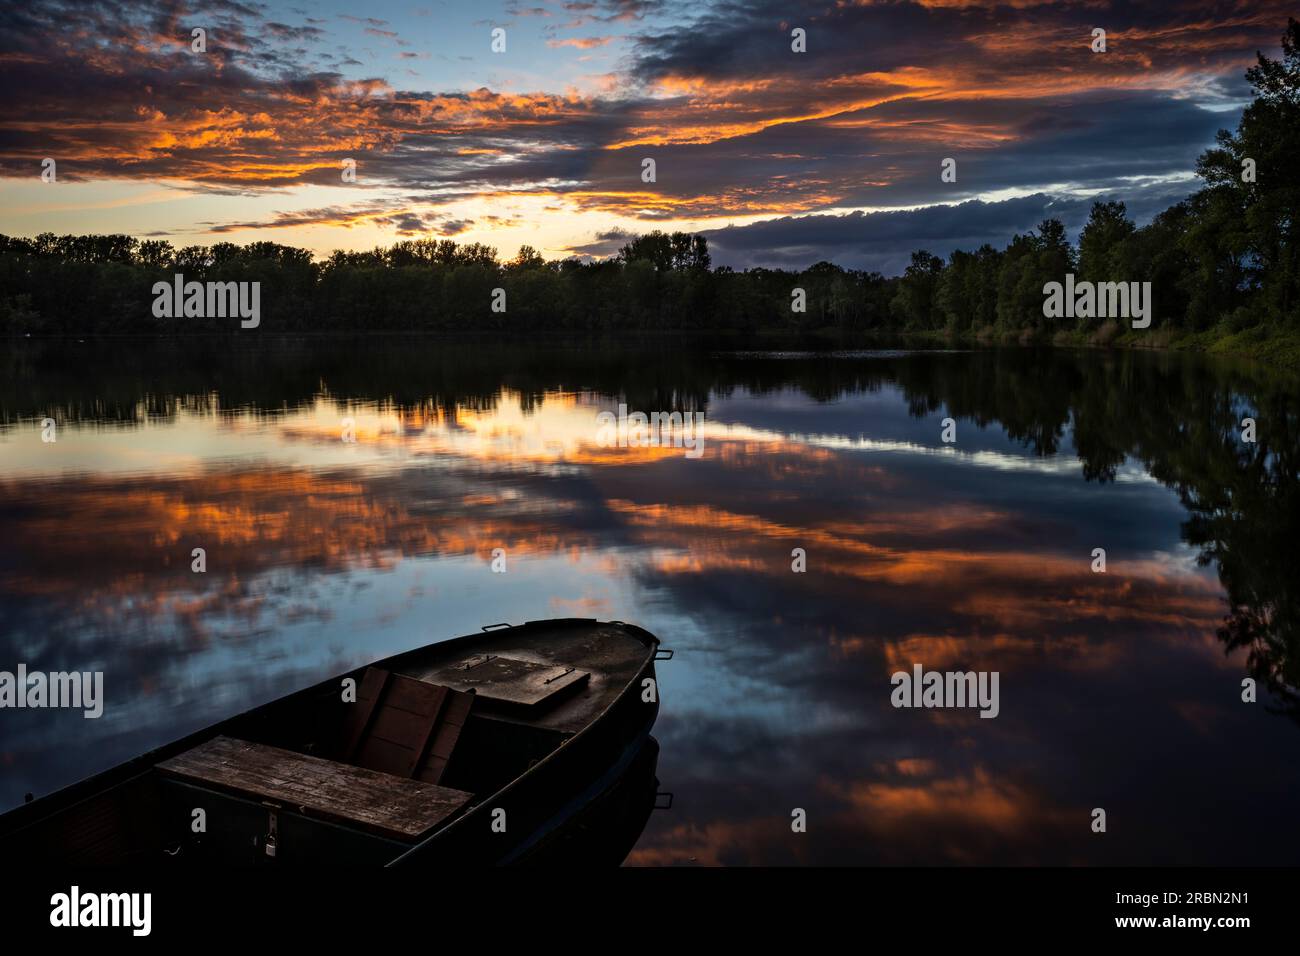 A lake at sunset, a boat in front. Orange clouds in the sky, reflecting in the lake. Rhine-Neckar-Region, Germany. Stock Photo